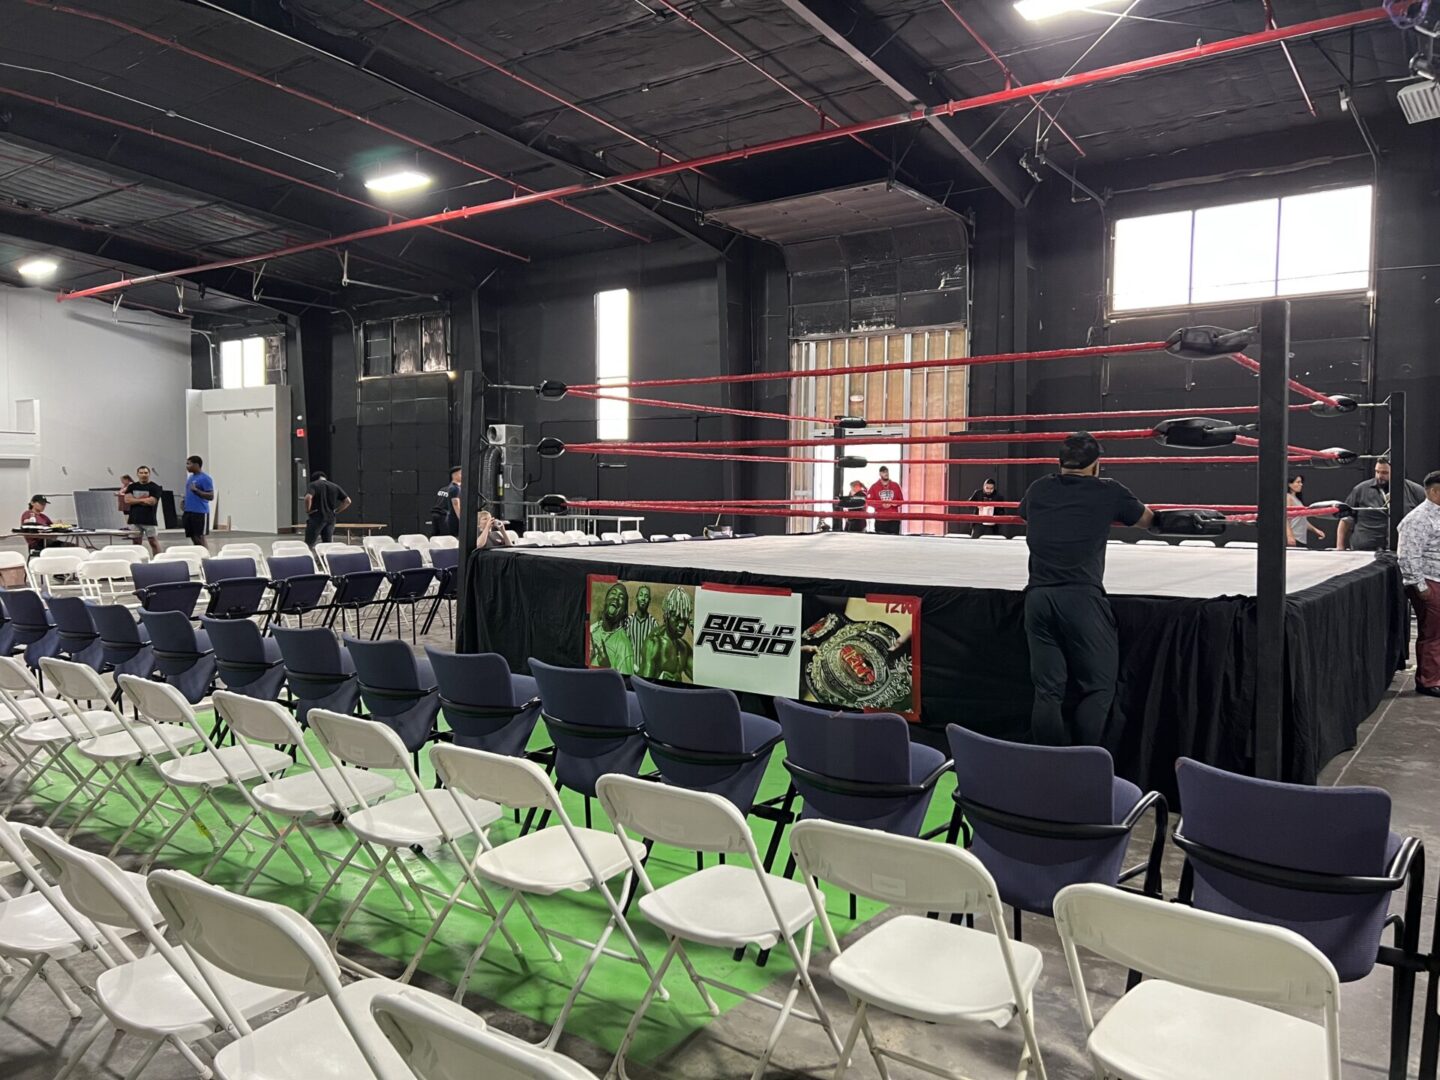 Wrestling event in the sound stage